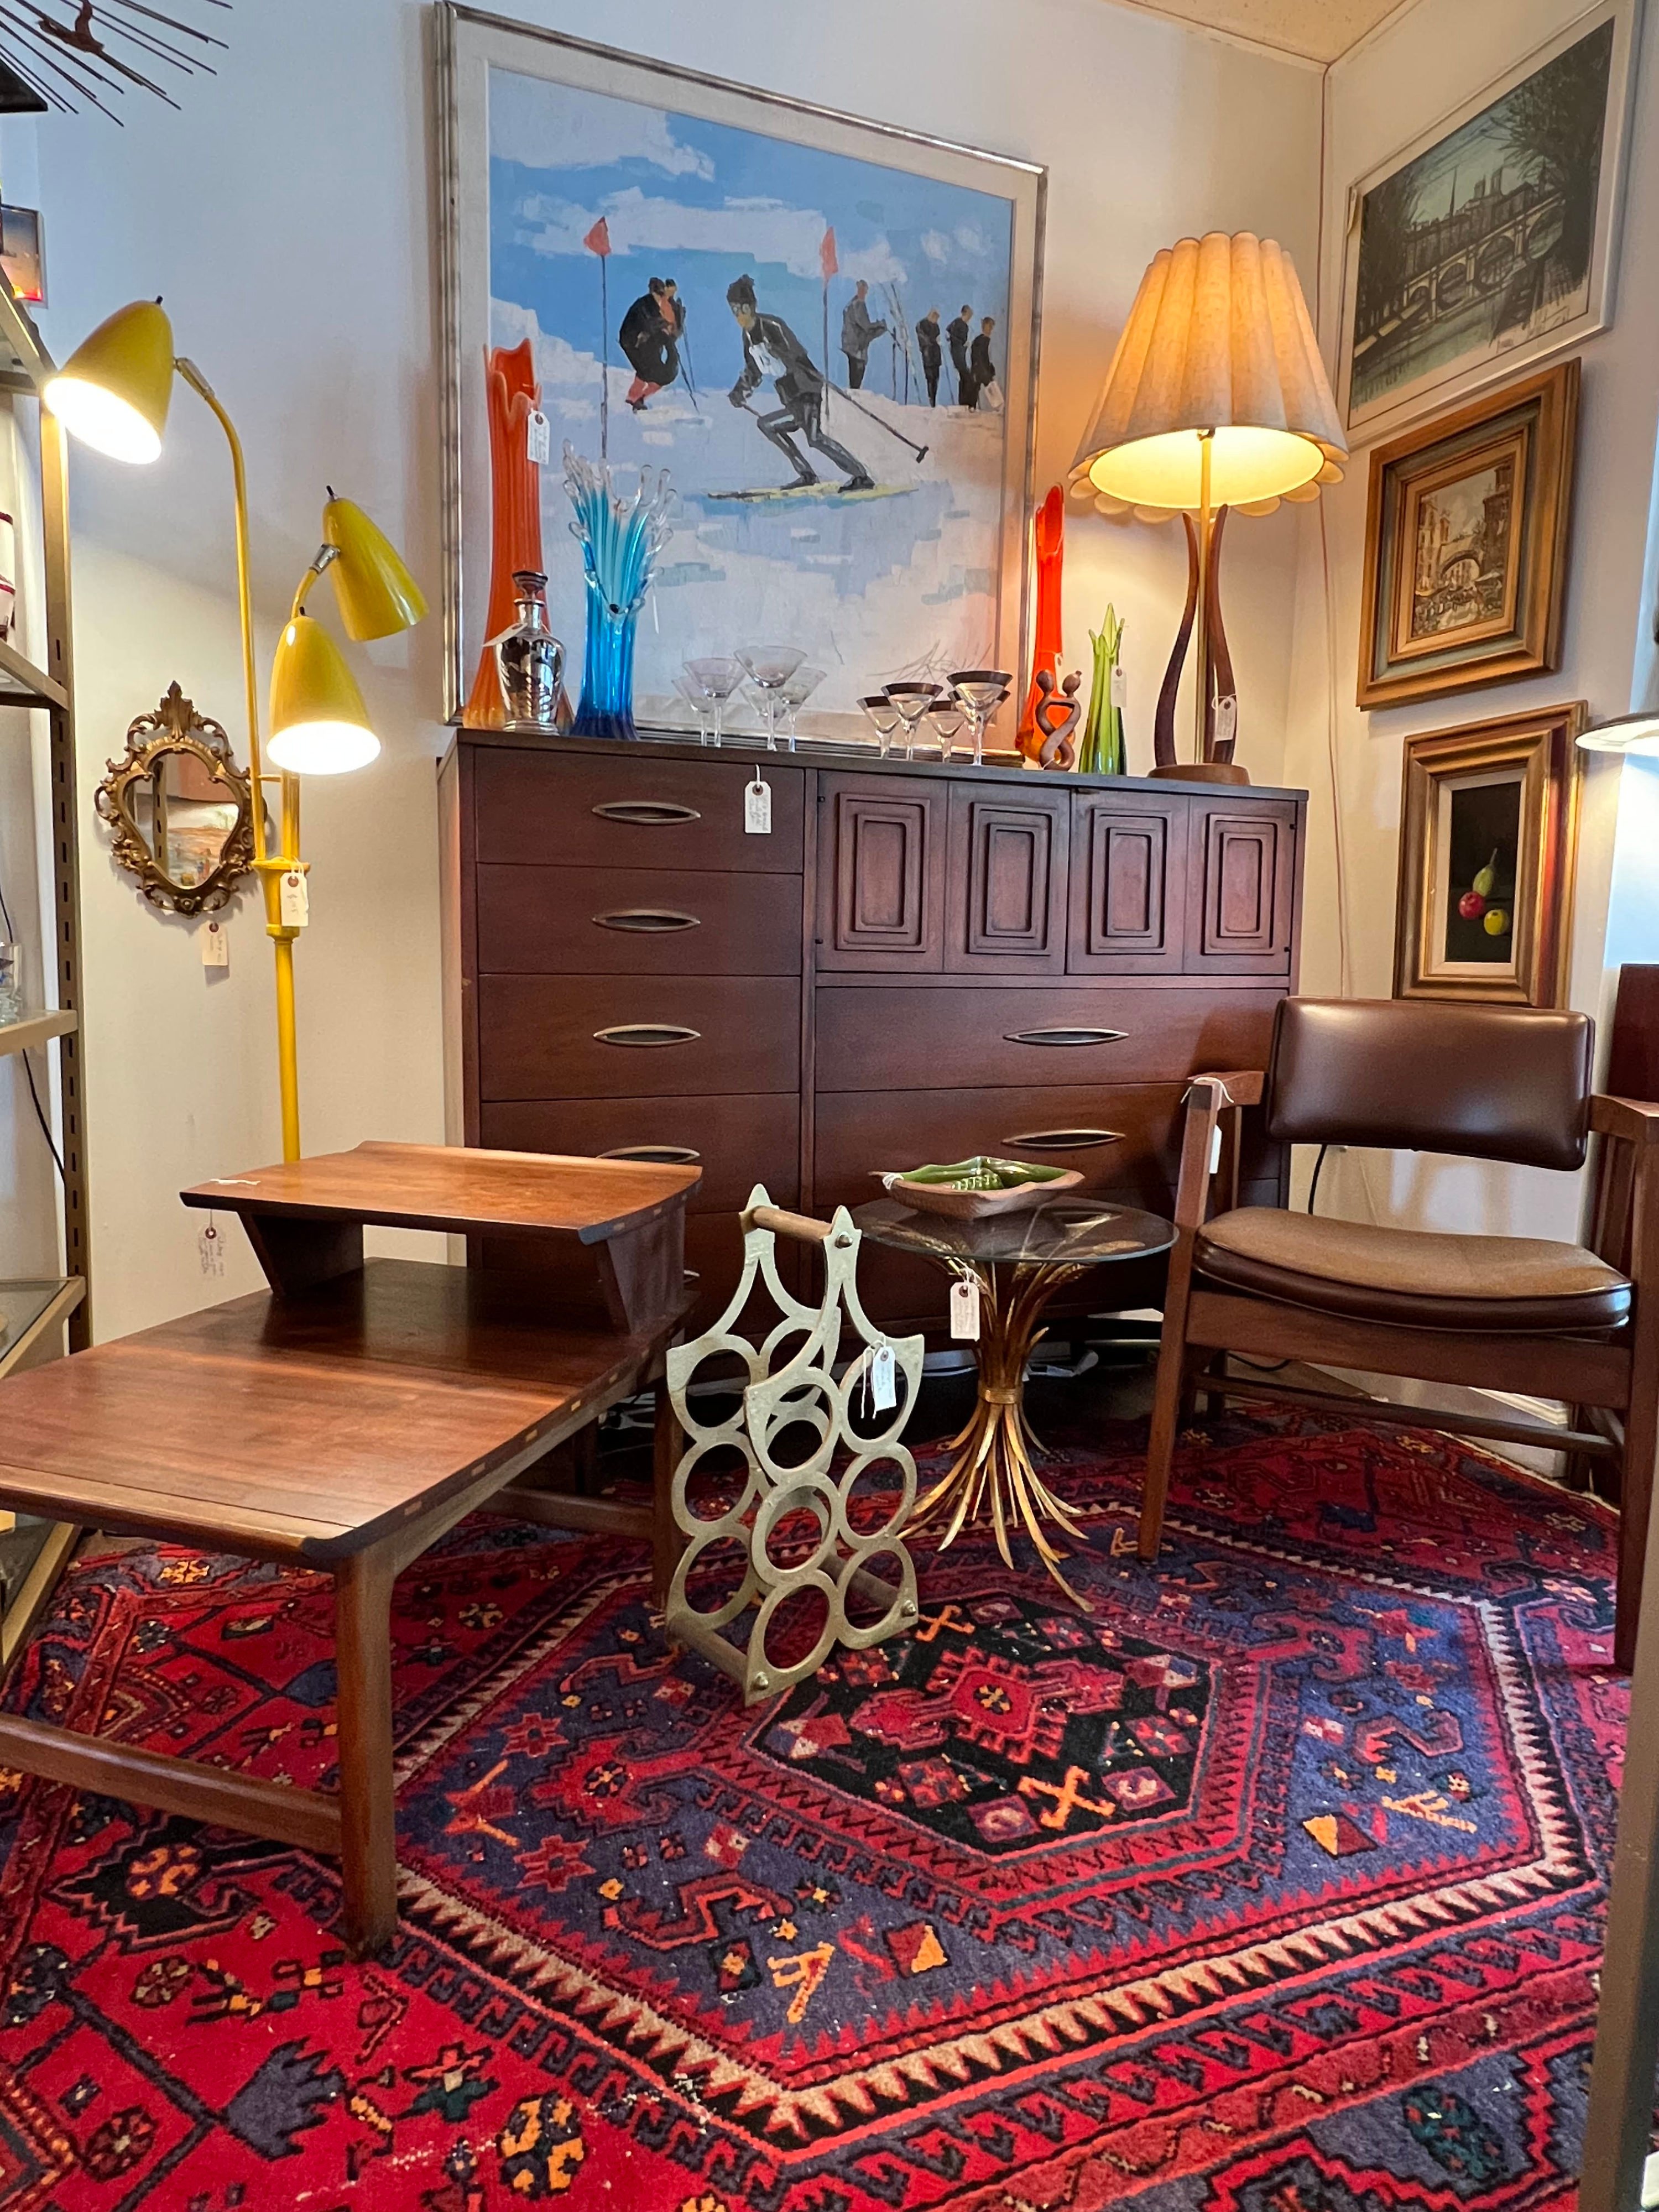 This Del Ray Vintage Store Specializes in Midcentury-Modern Furniture and Barware